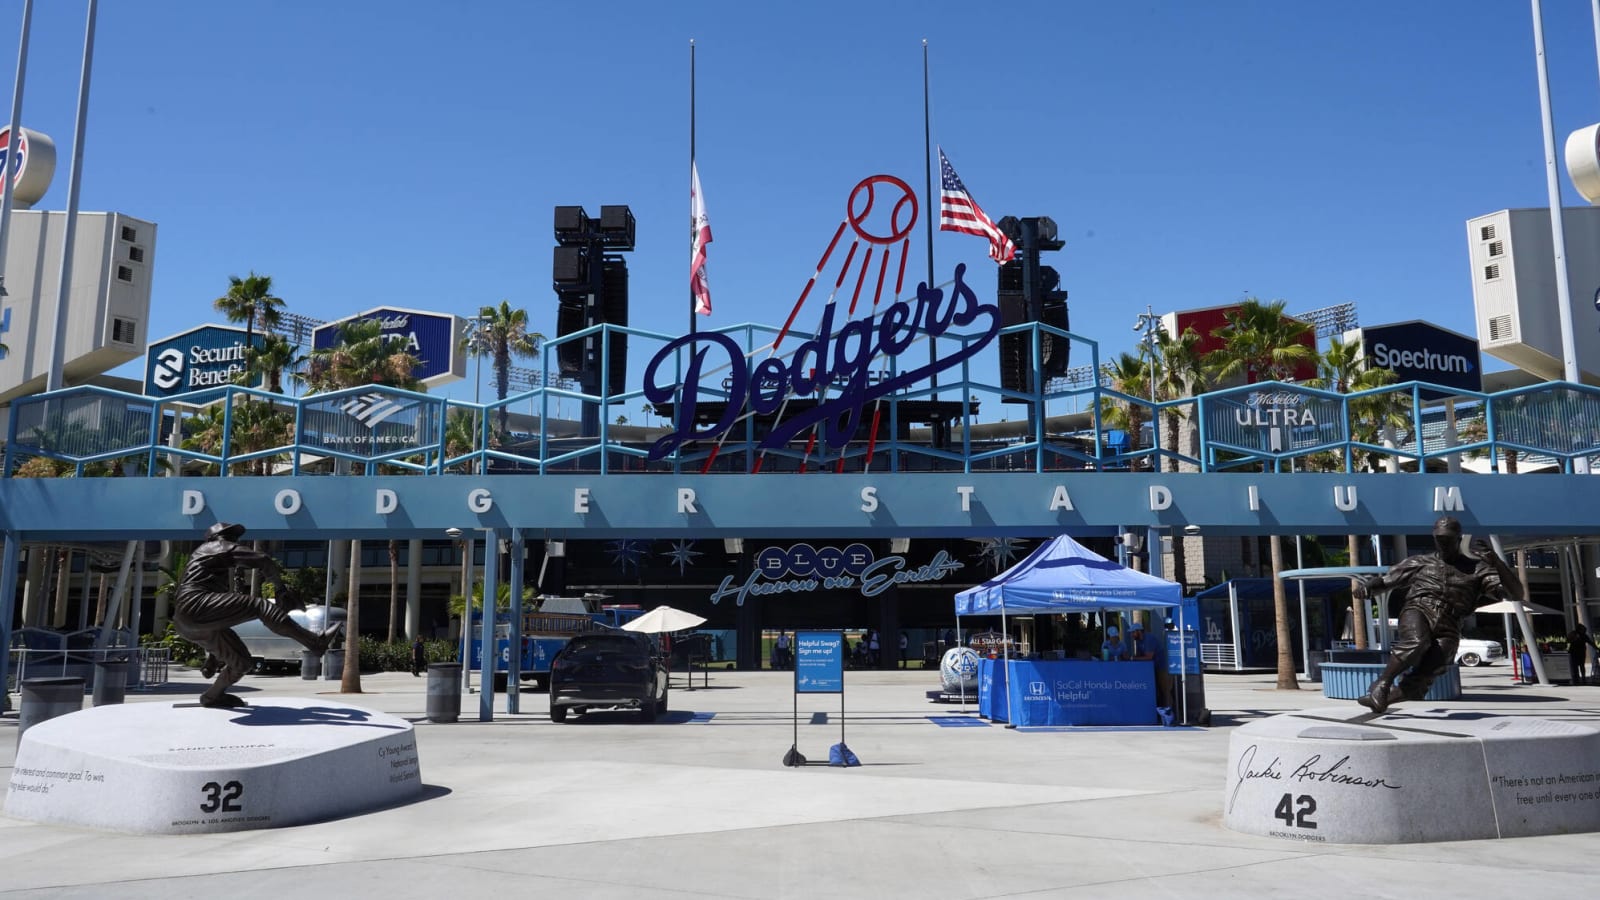 Dodger Stadium workers won't strike ahead of All-Star Game